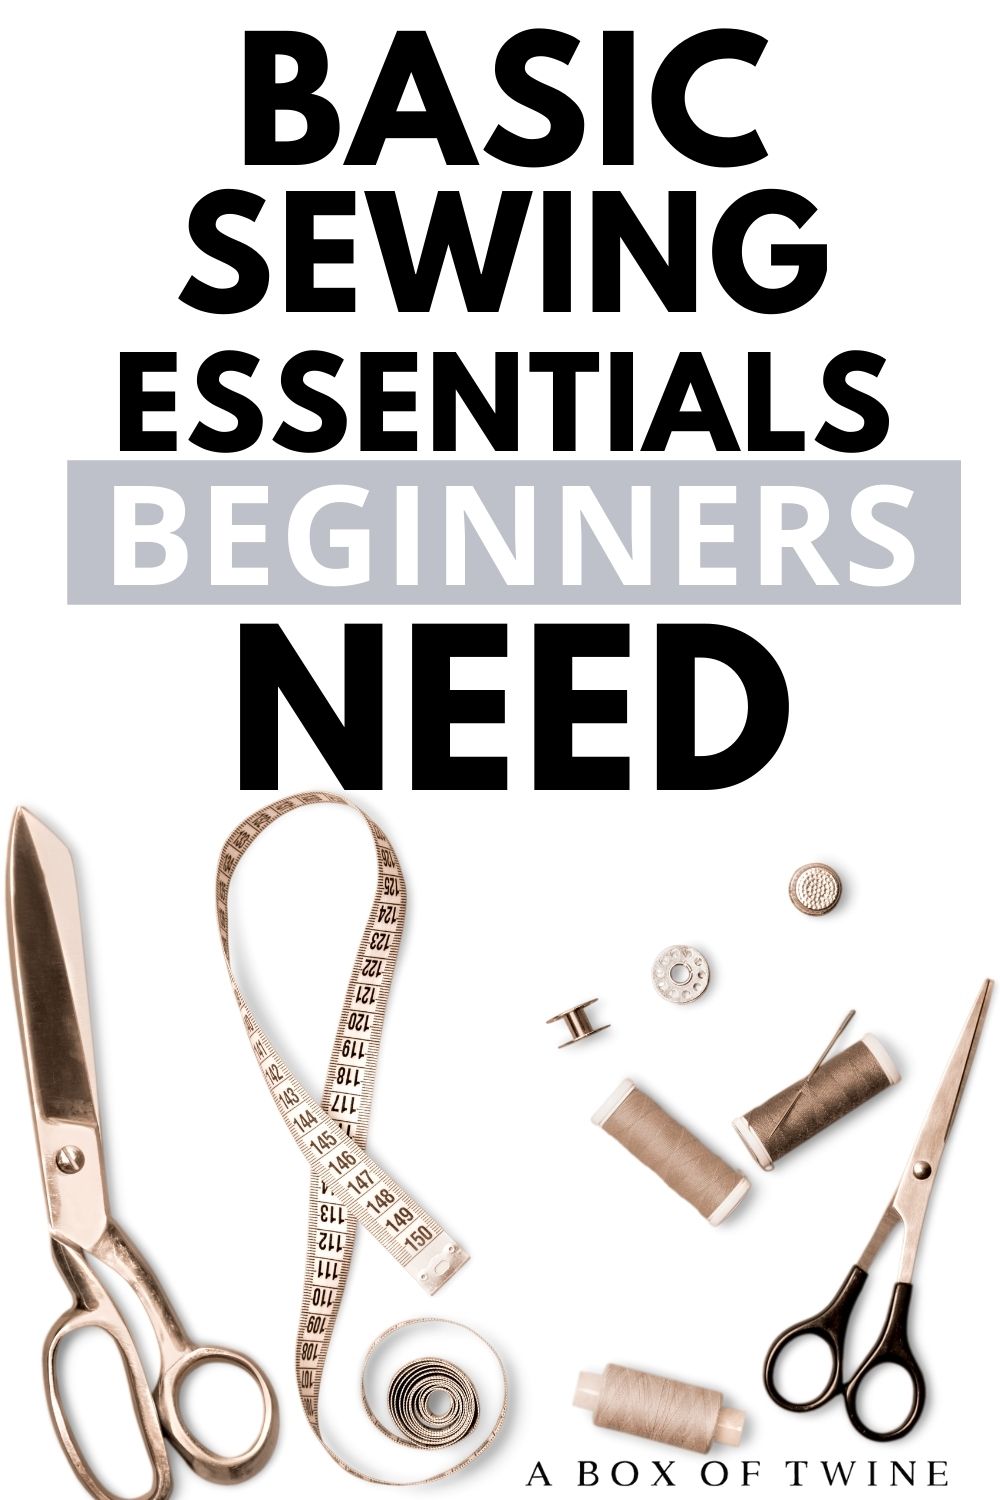 Top 10 Essential Sewing Supplies for Beginners  Basics to get started  Sewing, Sewing 101 